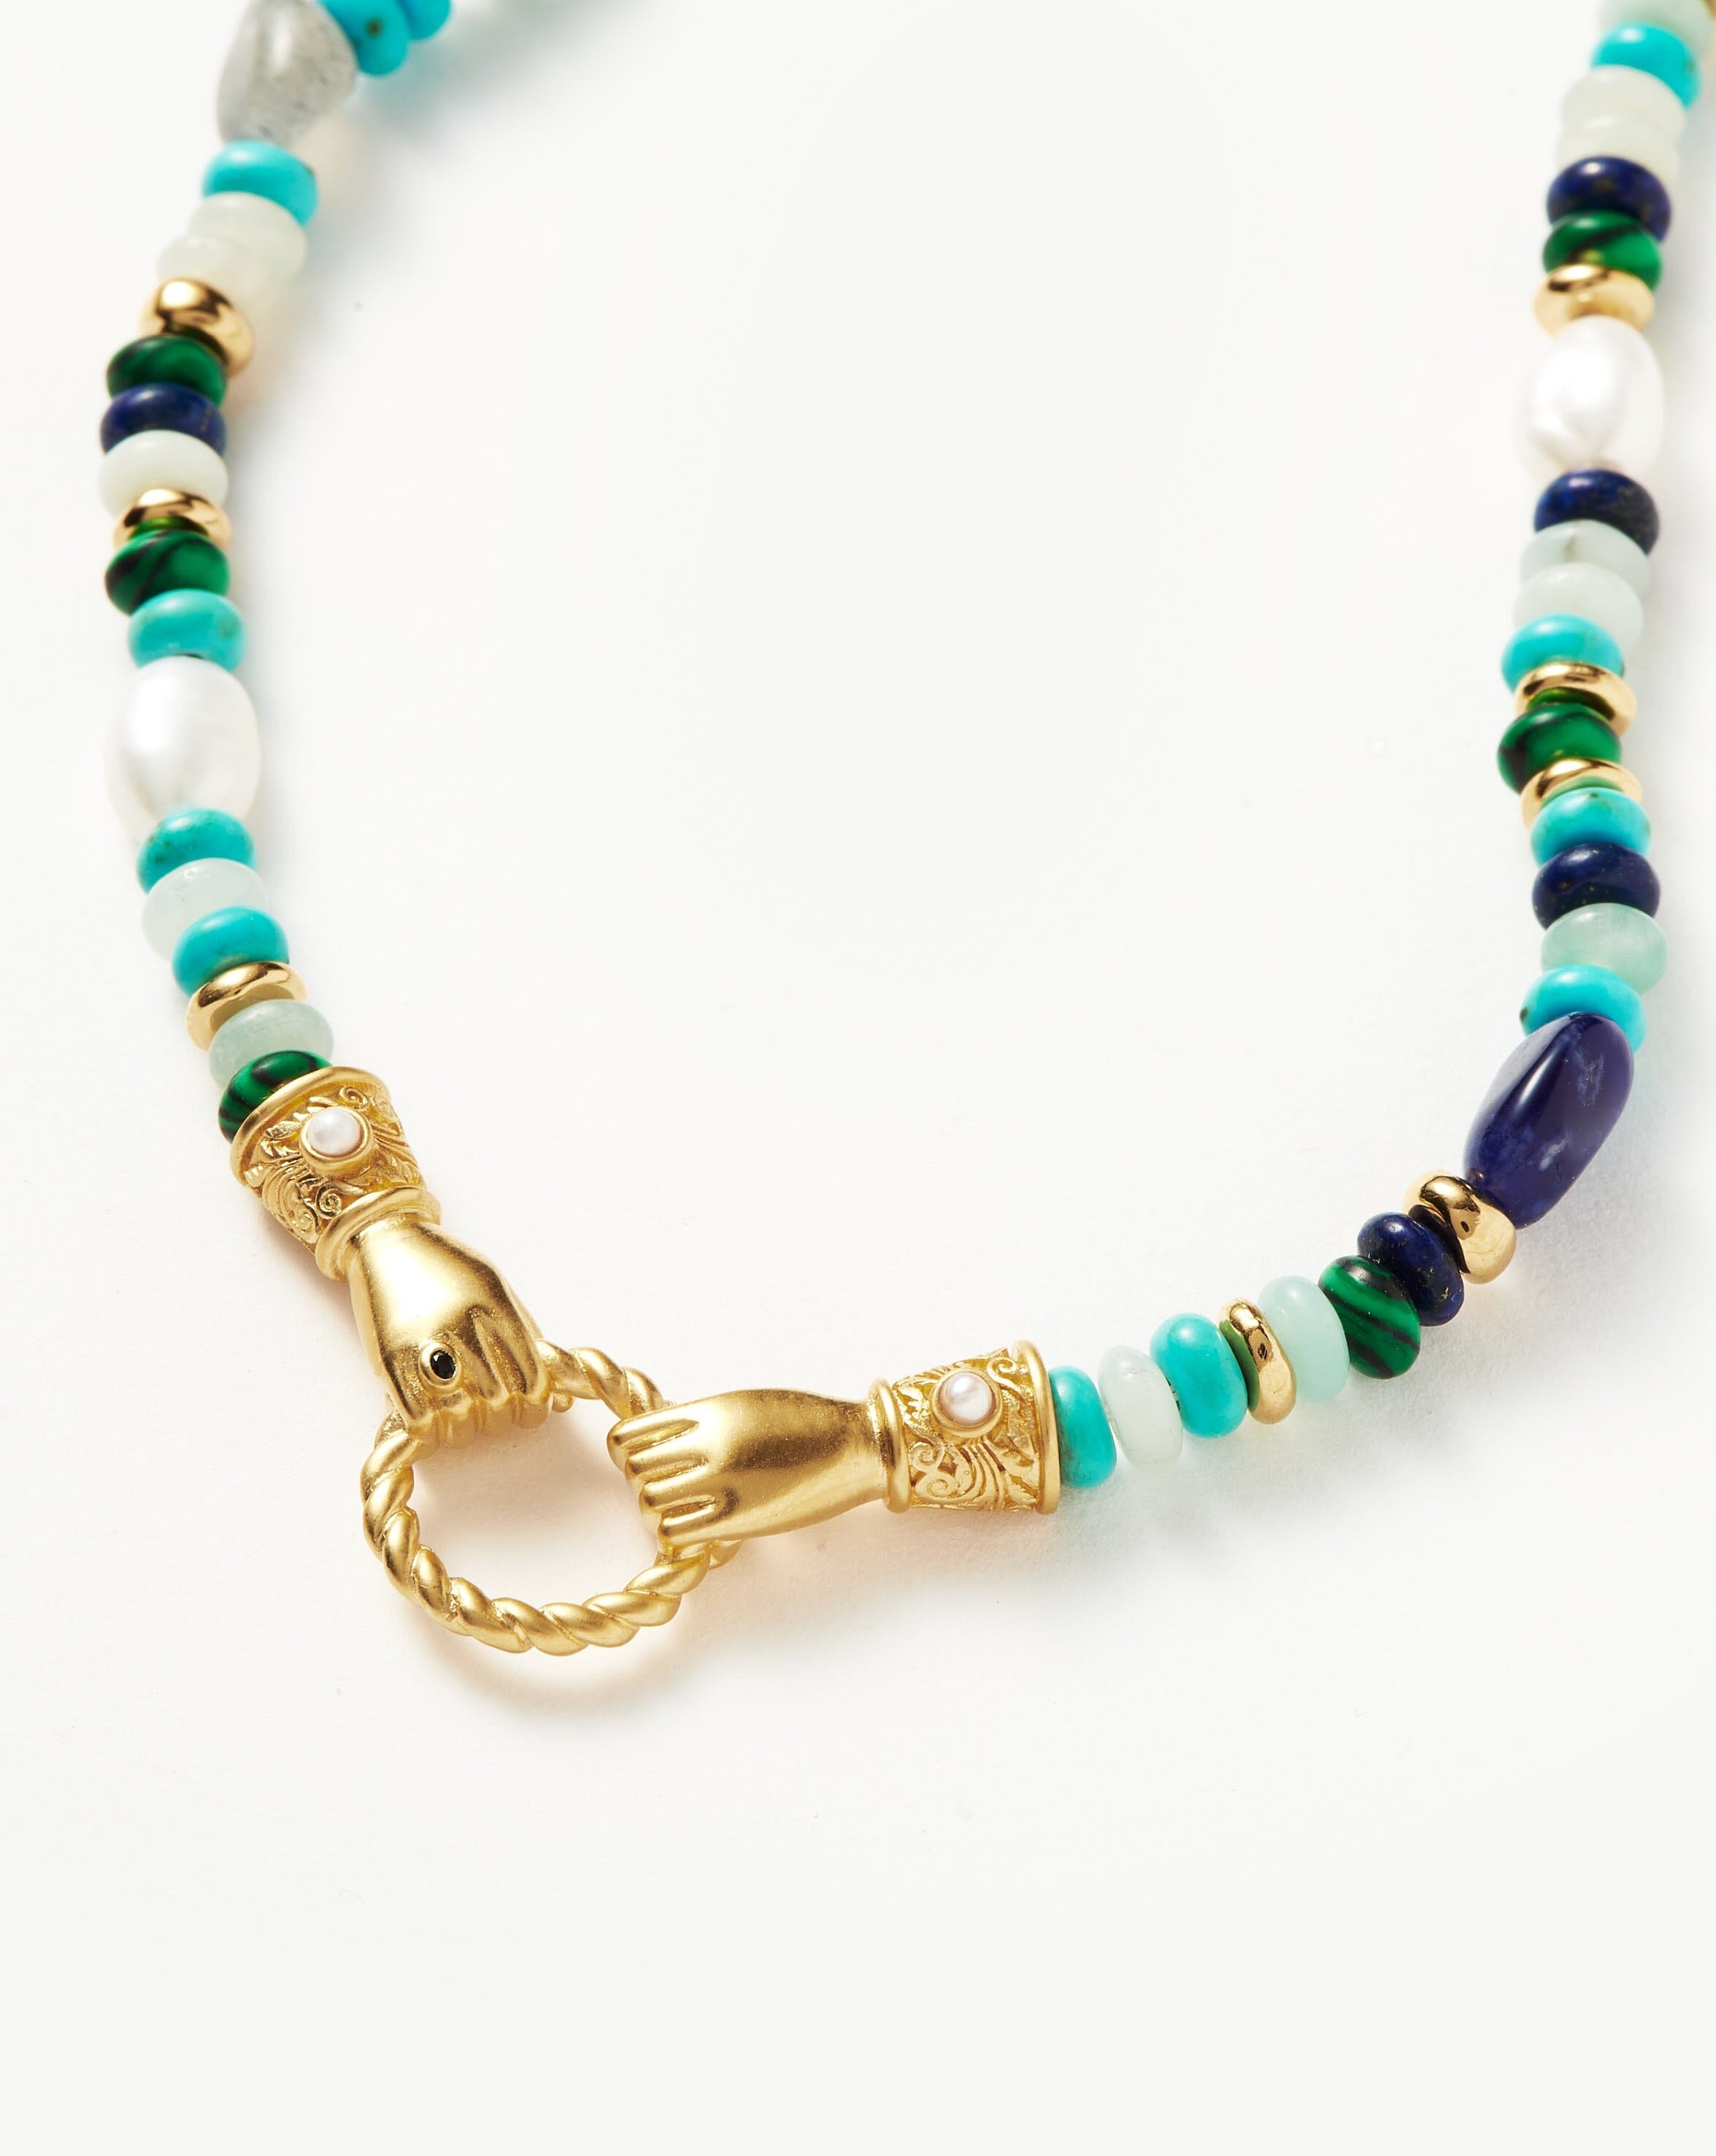 harris reed in good hands beaded gemstone necklace 18ct gold platedturquoise lapis pearl necklaces missoma 569209